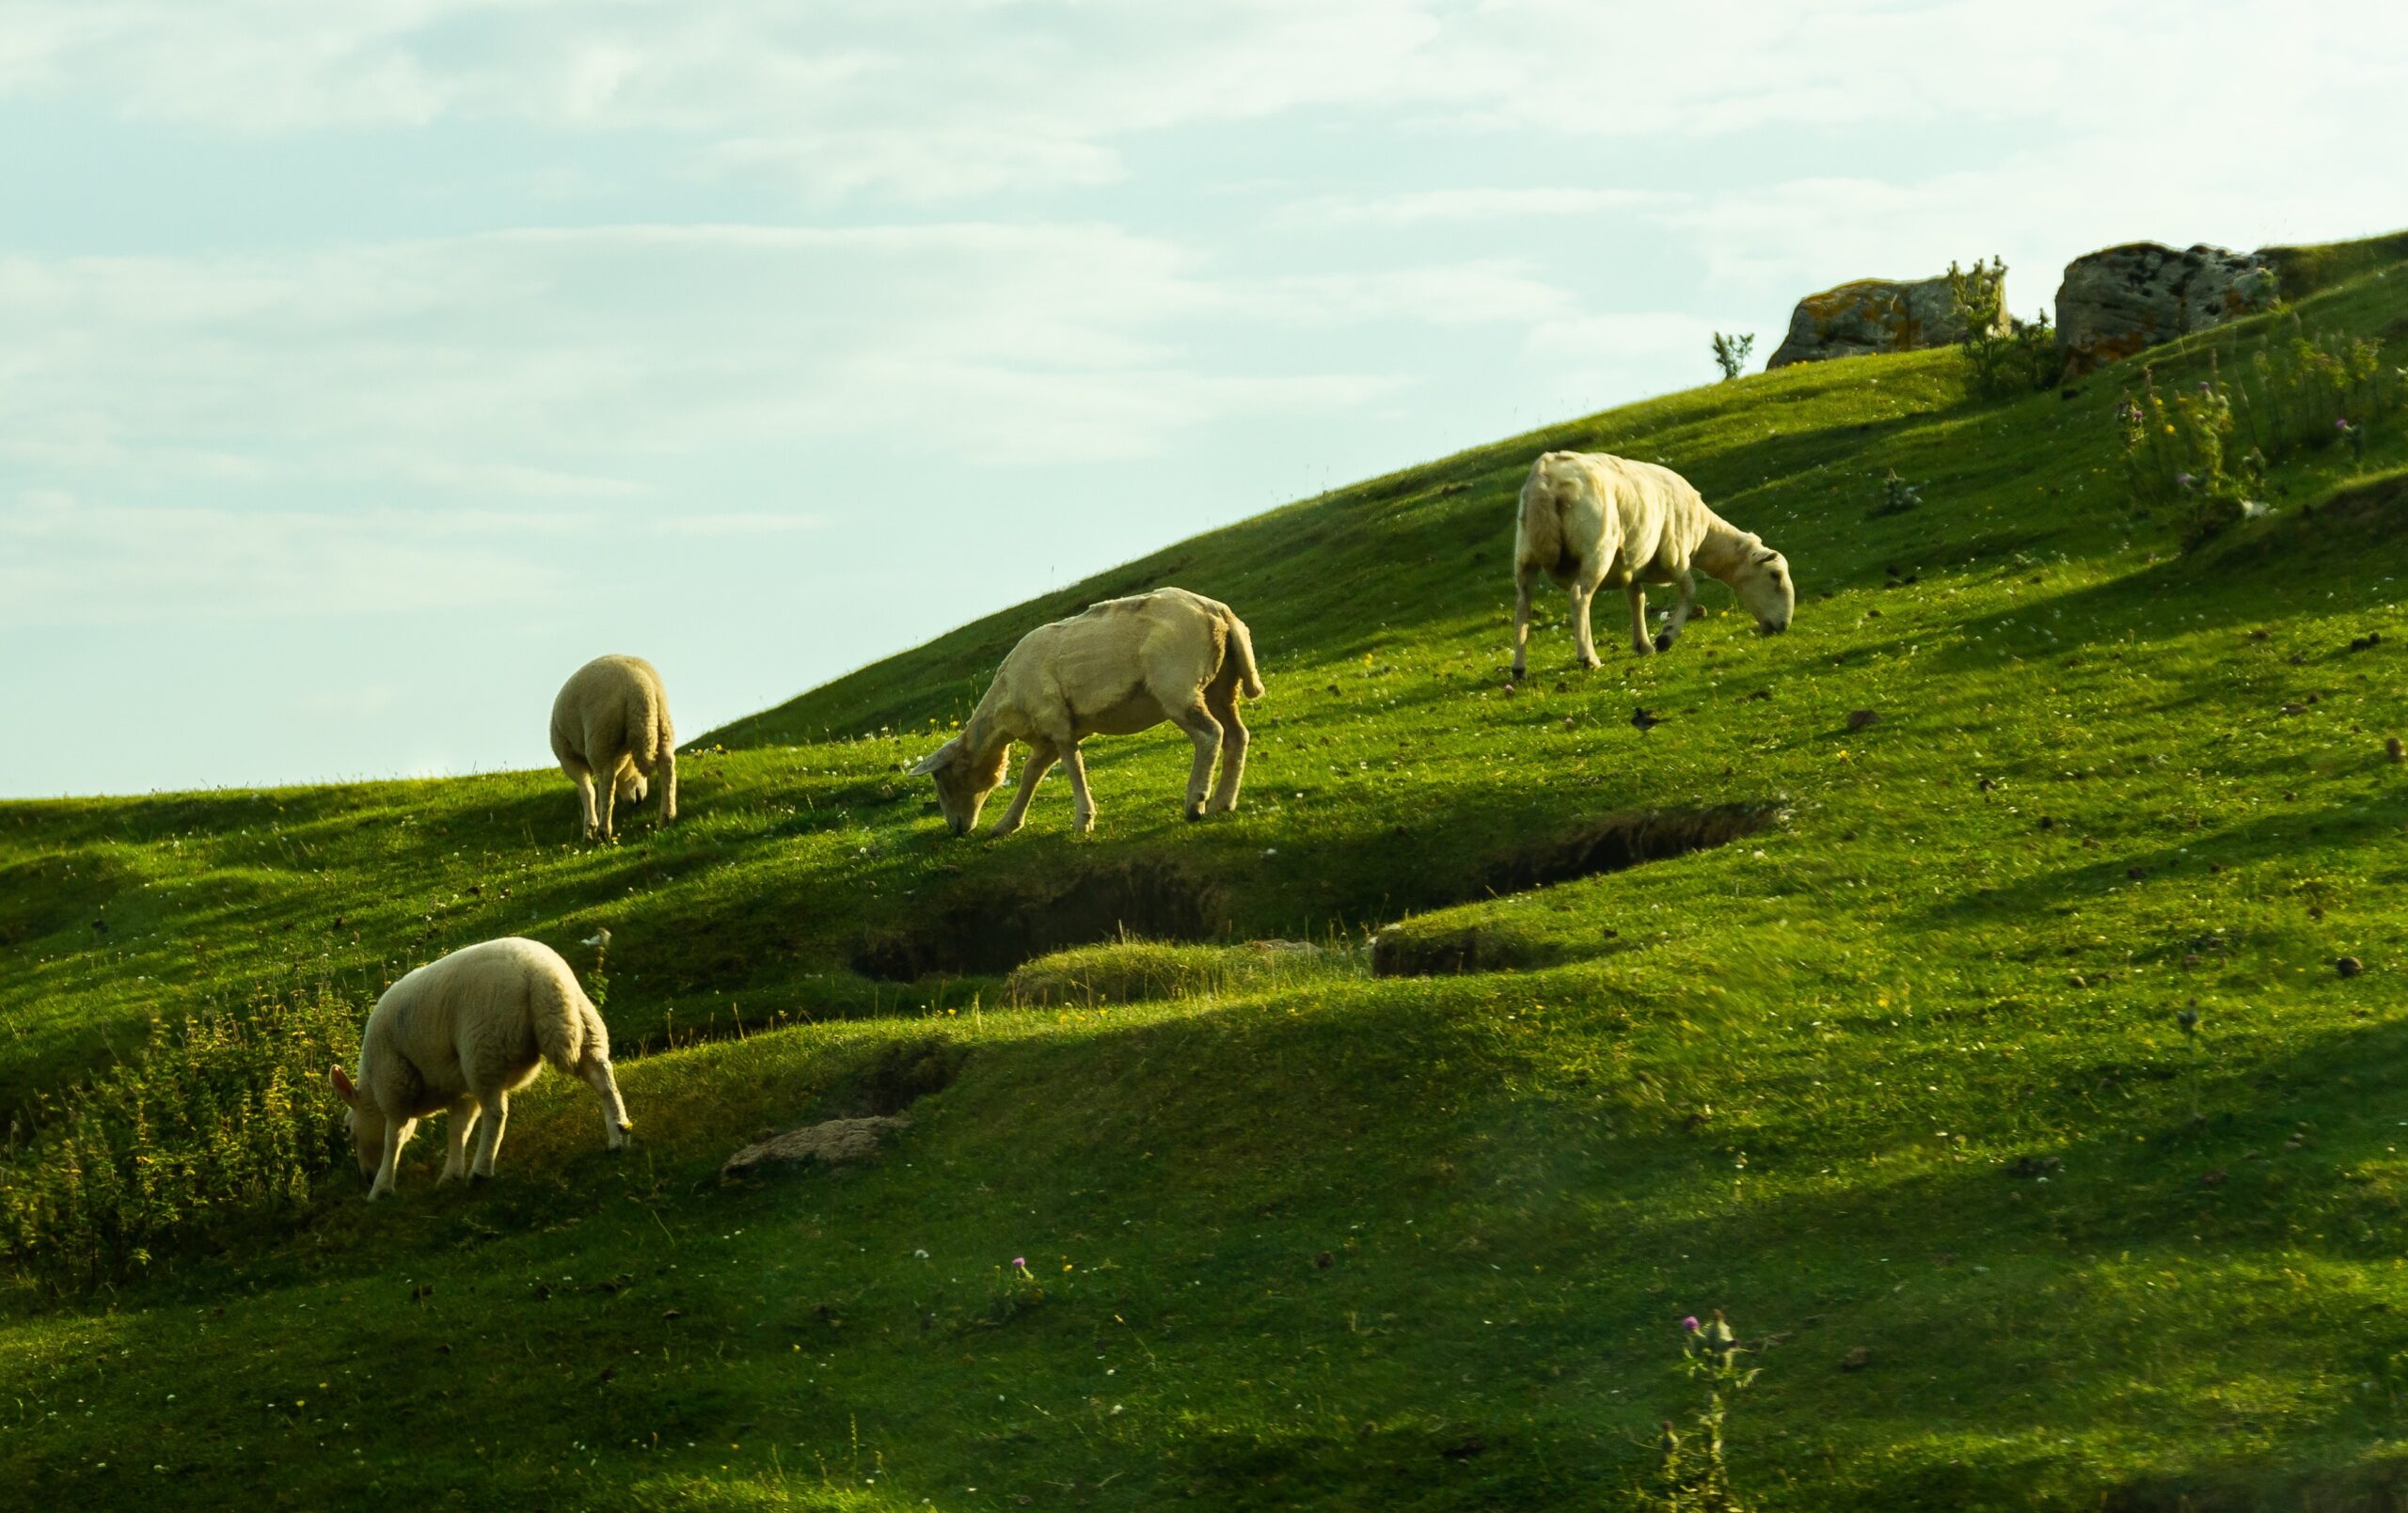 A hillside covered in lush, green grass with sheep grazing on it, the blue sky above.